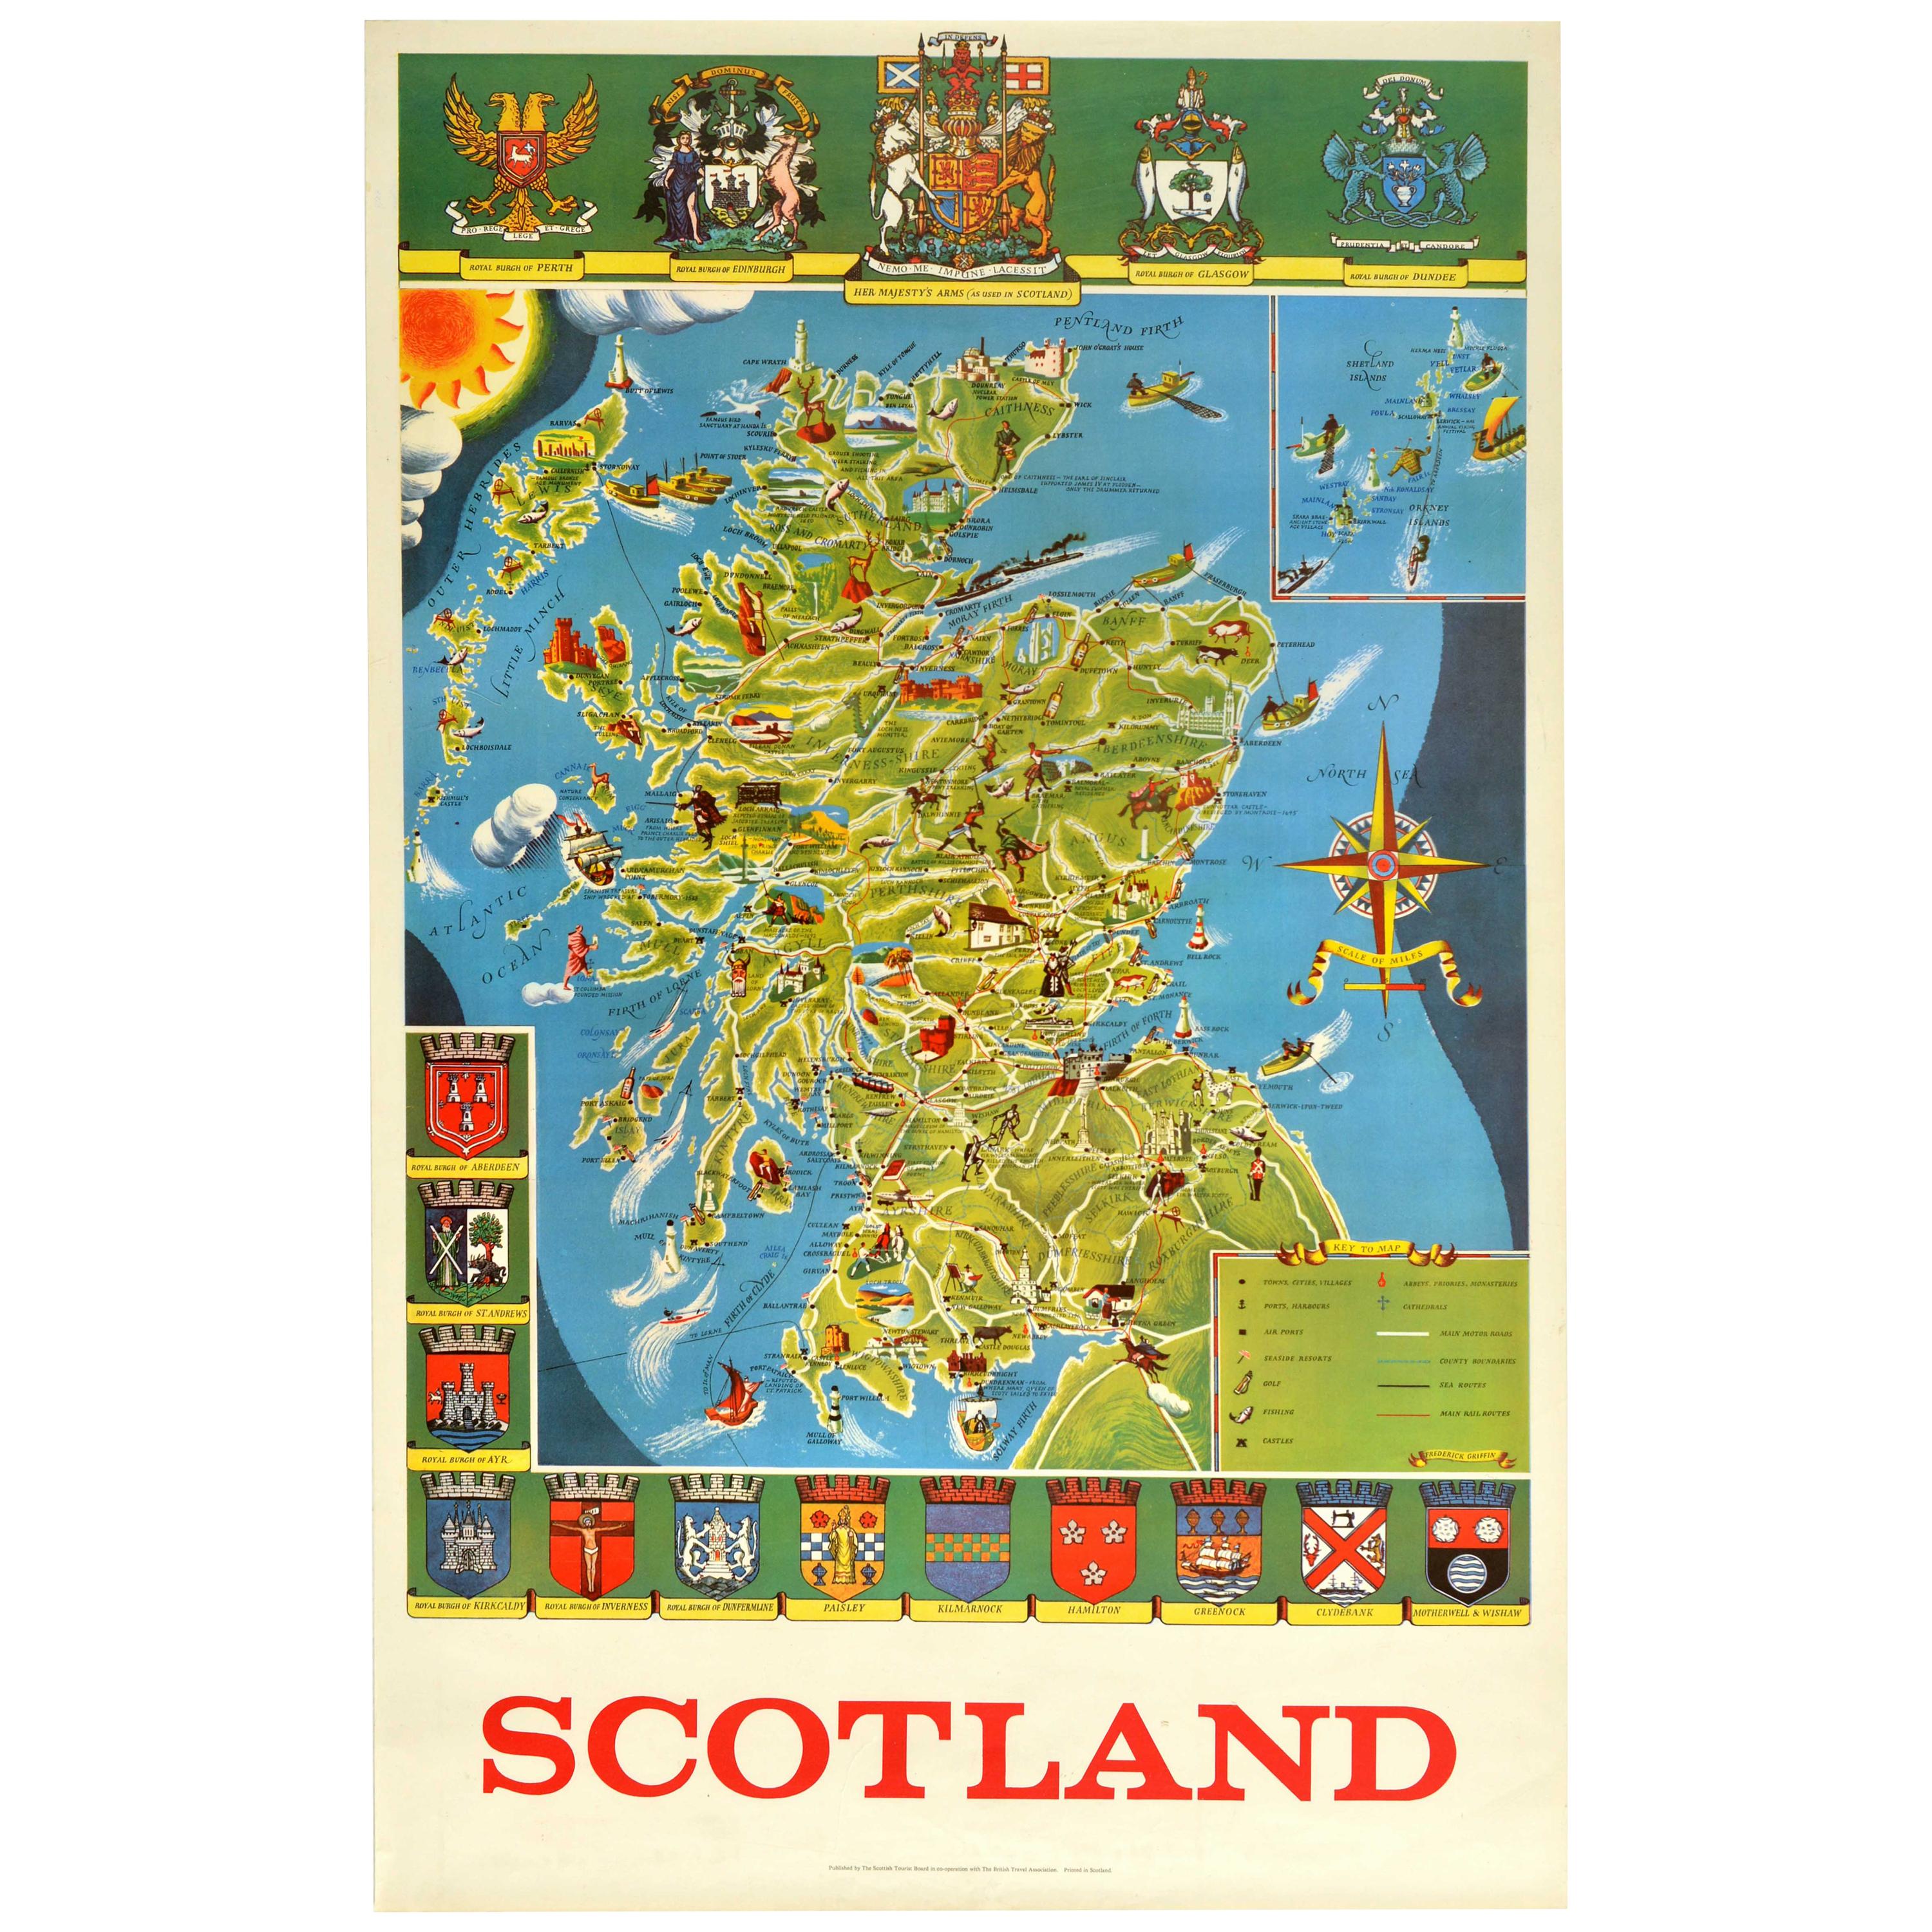 Clan Lands of Scotland Map Great Britain Vintage Travel Advertisement Poster 